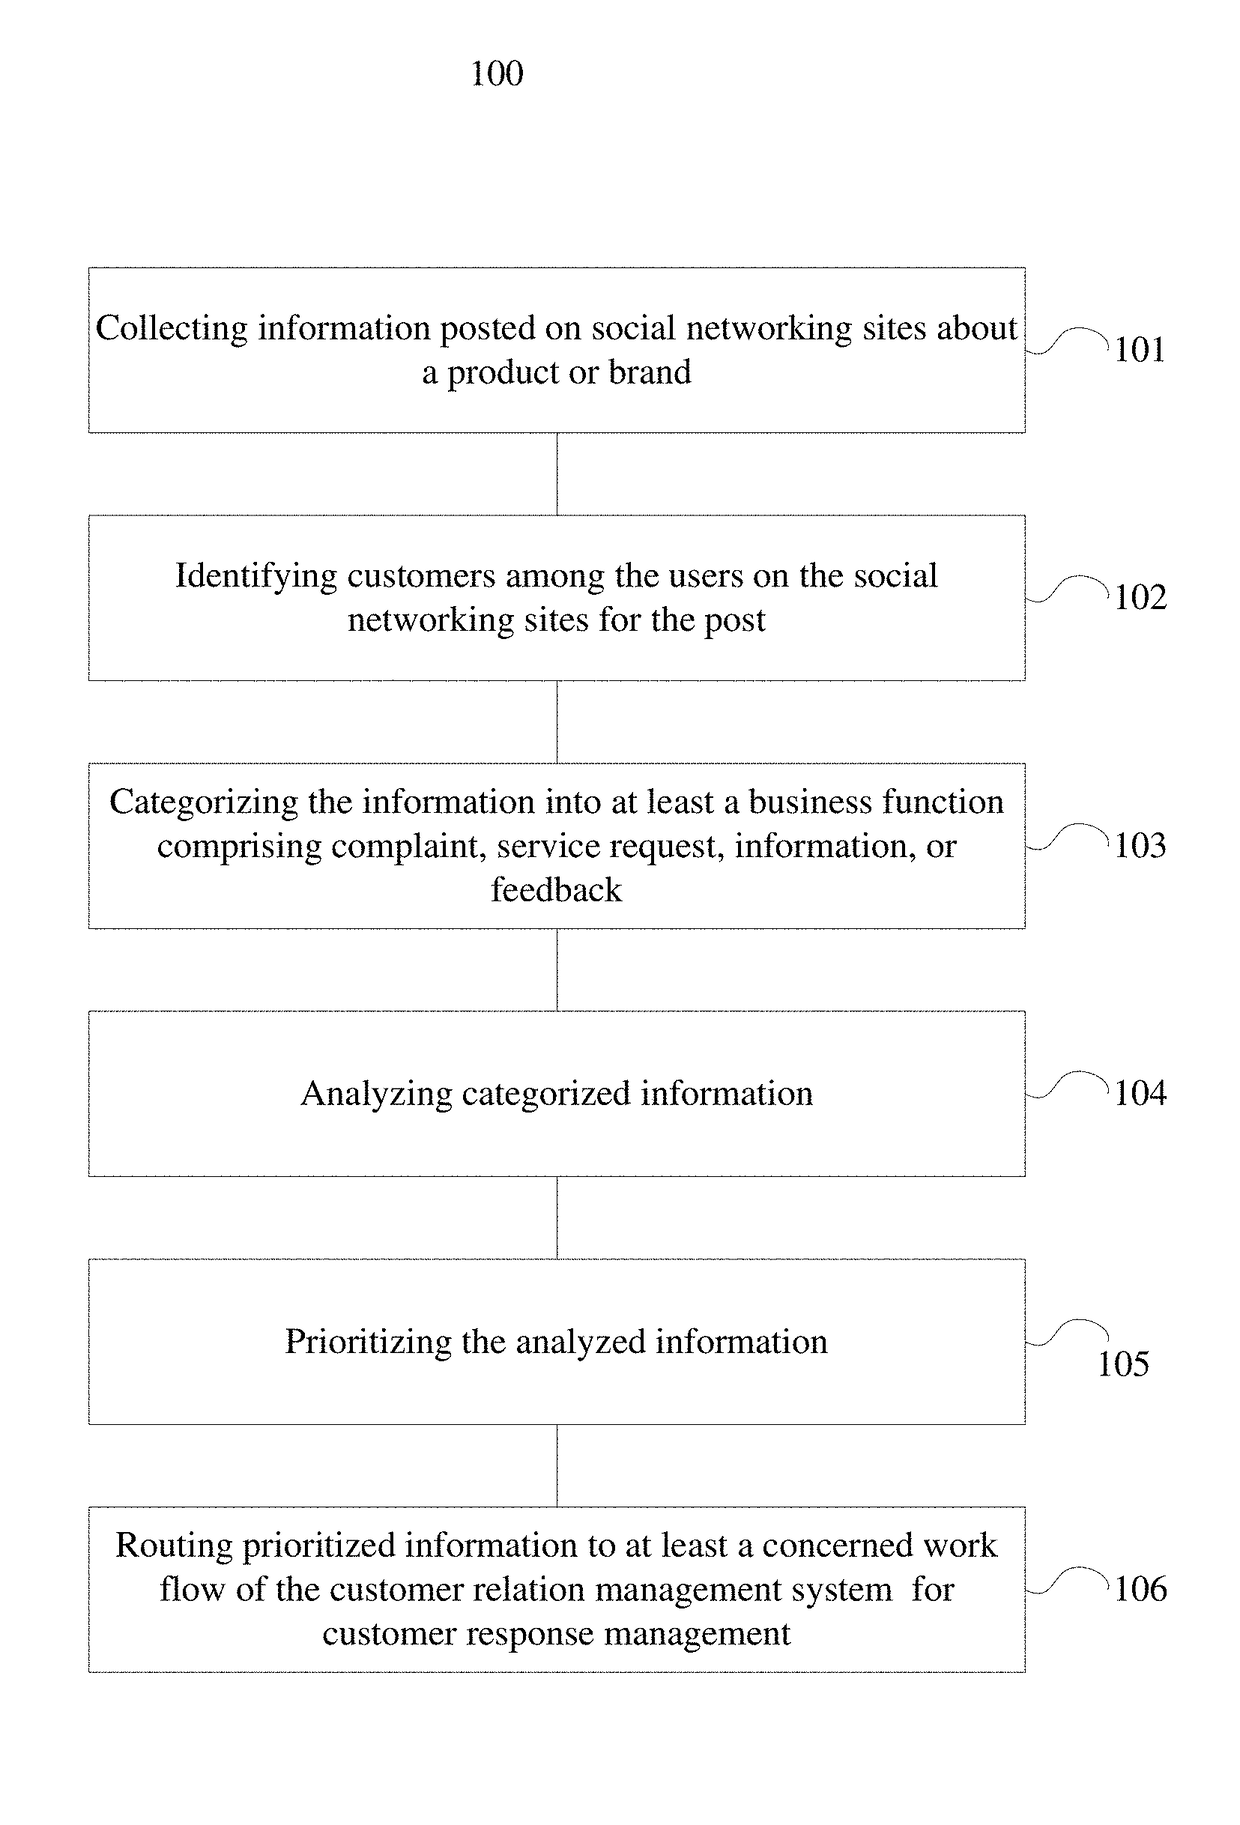 System and method for categorization of social media conversation for response management